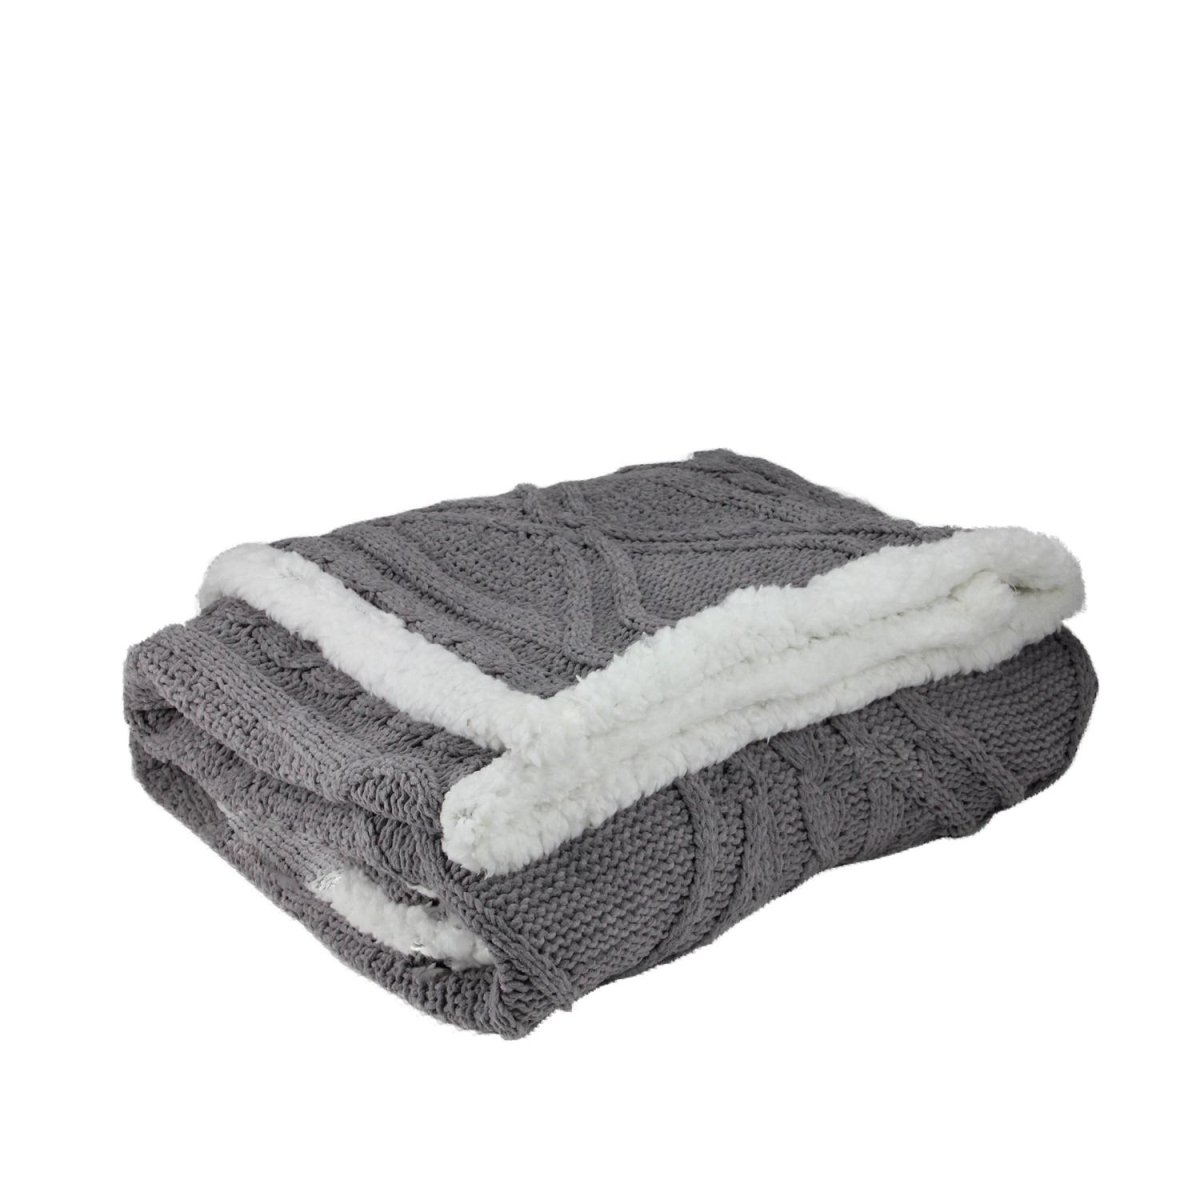 32667181 50 X 60 In. Gray Cable Knit Plush Sherpa Throw Blanket